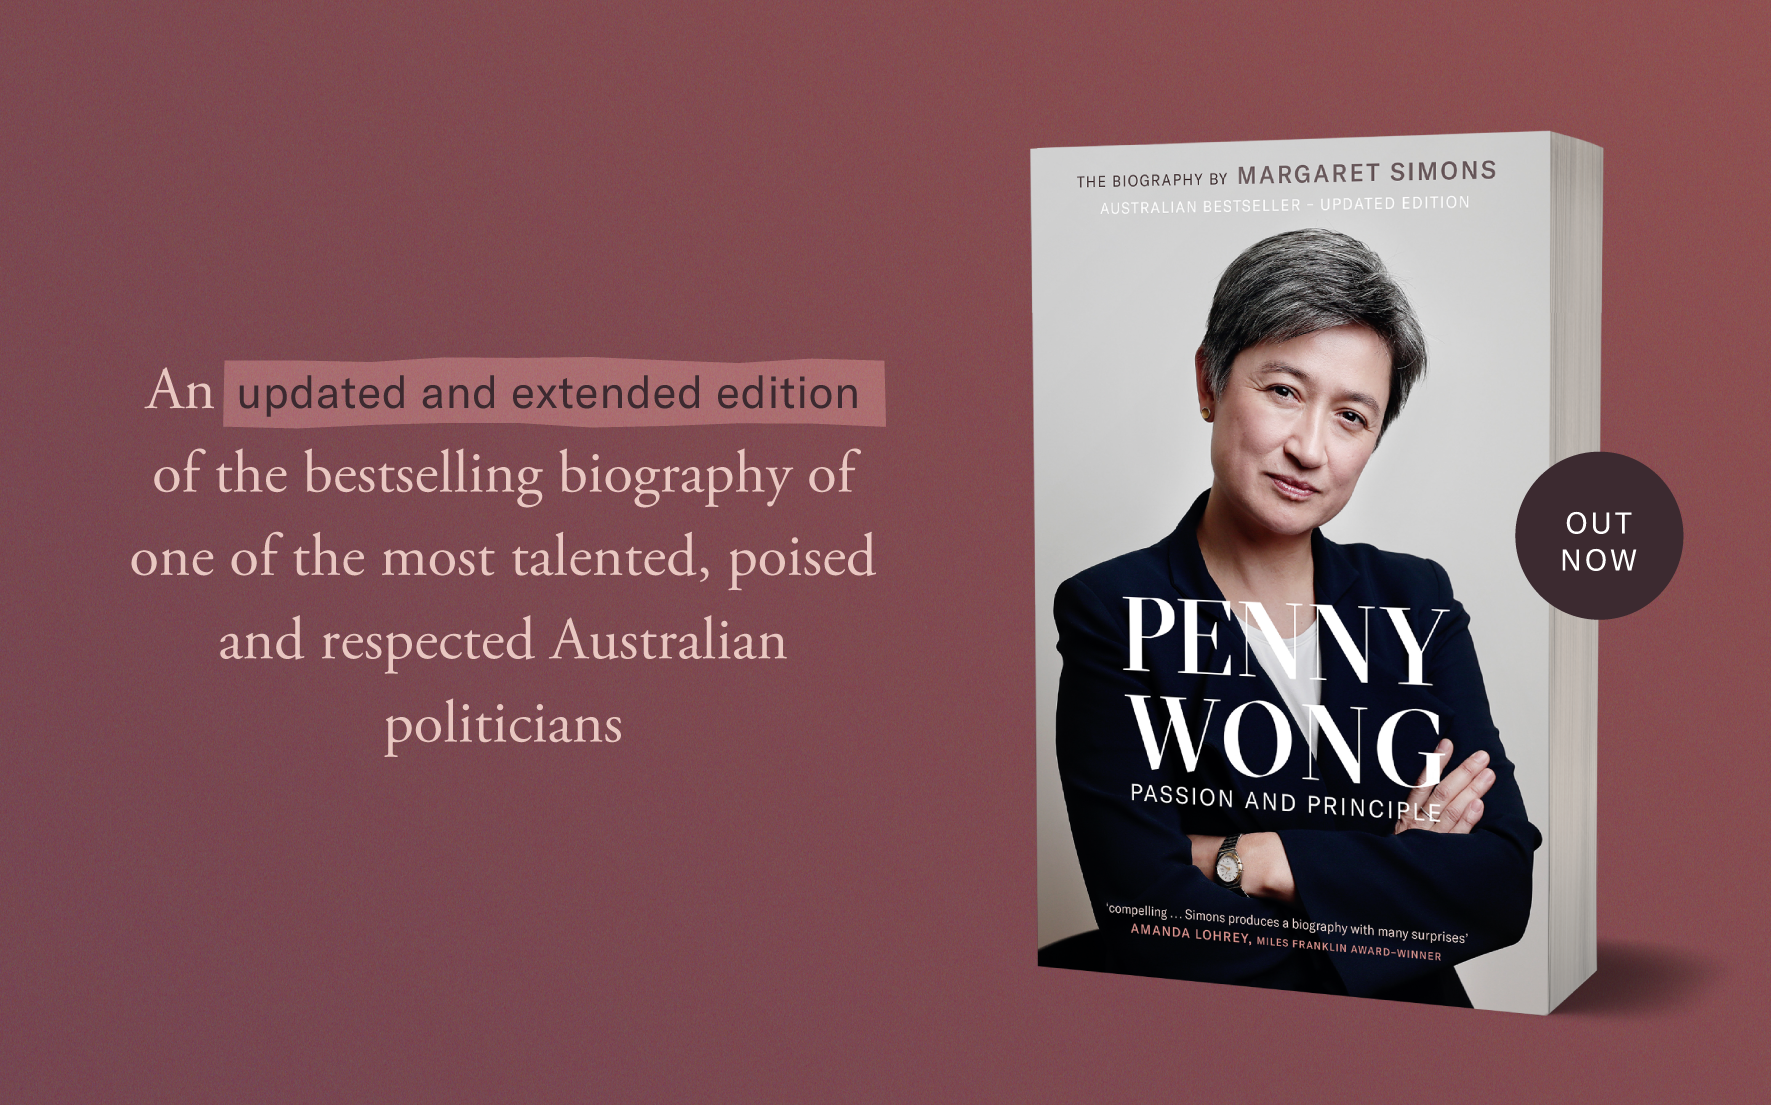 Out now: Penny Wong: Passion and Principle